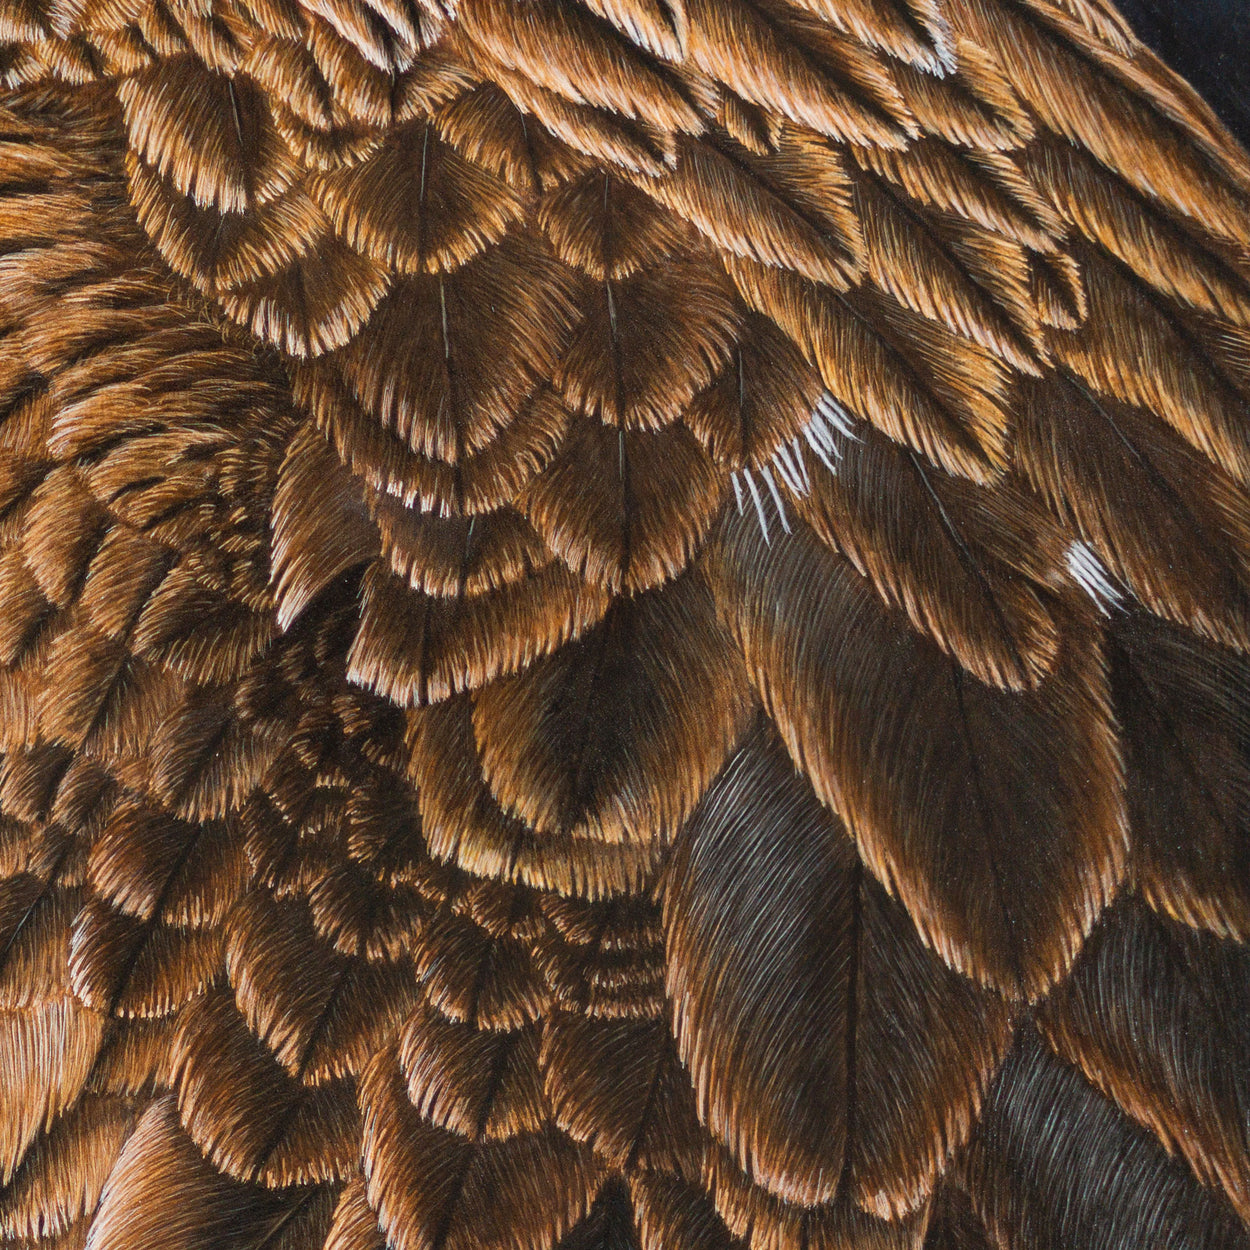 Red Kite Portrait Painting Close-up 2 - Jill Dimond